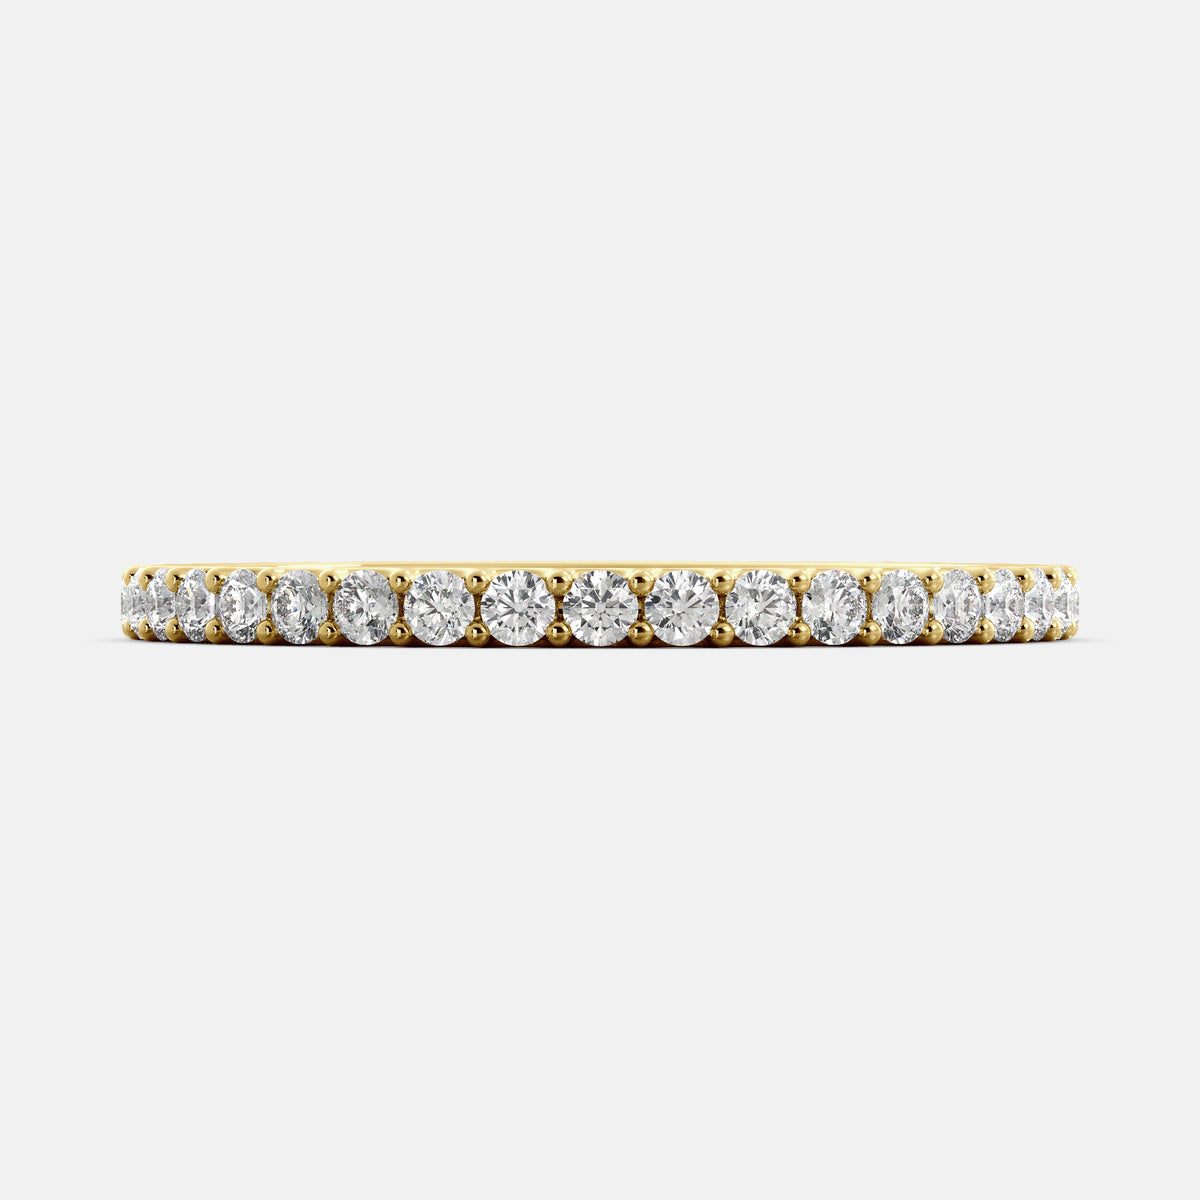 A close-up of a yellow gold half eternity wedding band with a row of round diamonds. The band is a classic and timeless design that is perfect for any occasion. The diamonds sparkle and shine, adding a touch of glamour.